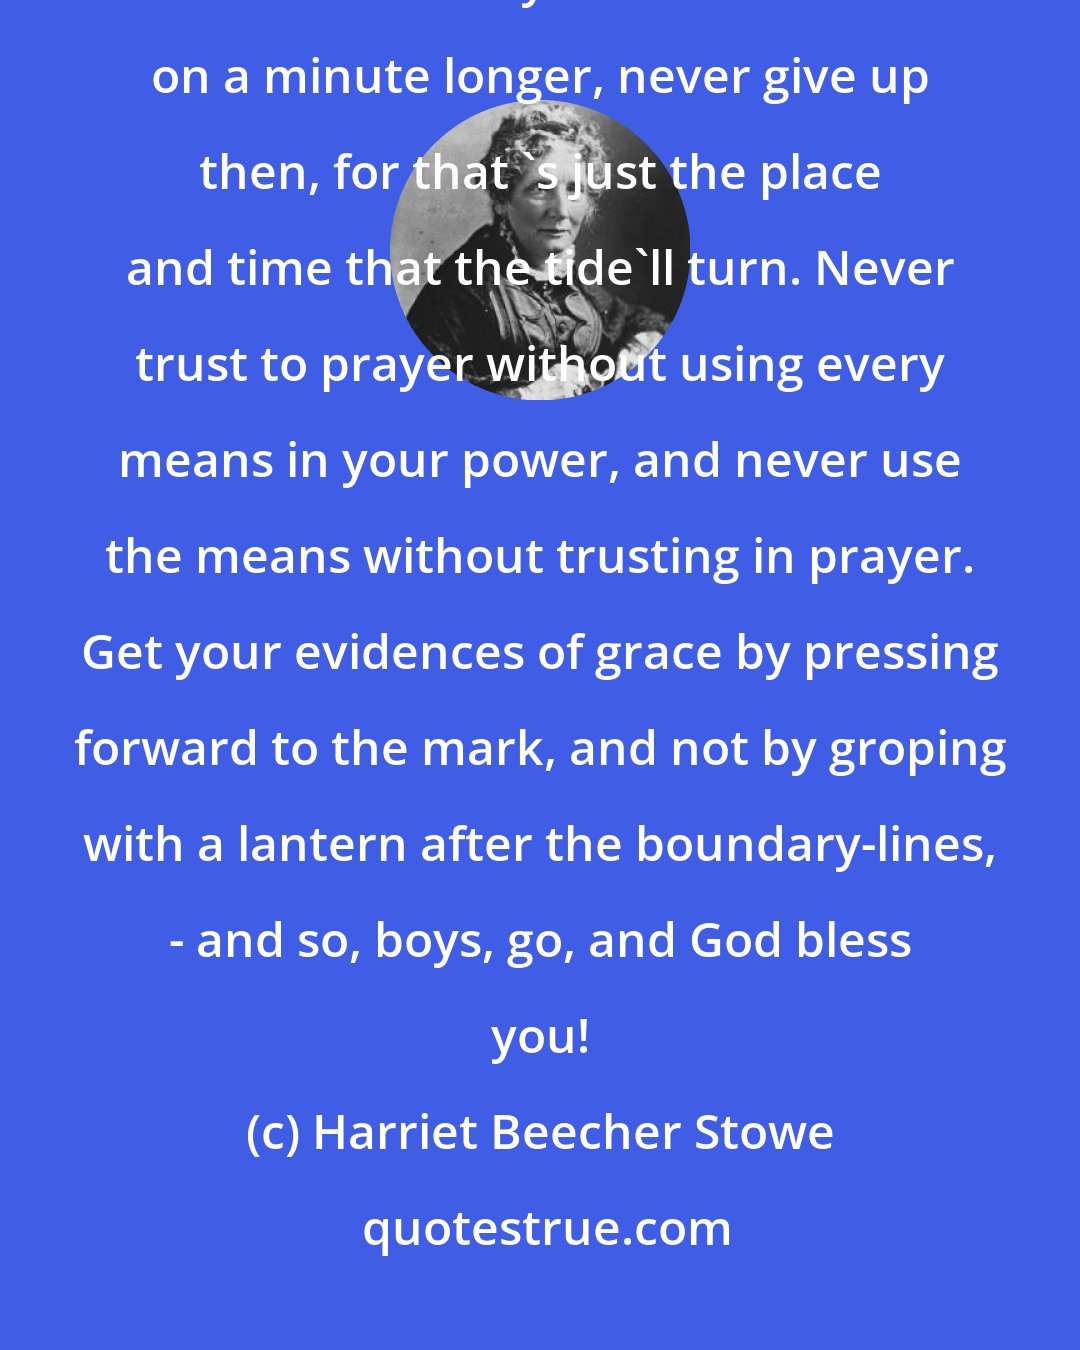 Harriet Beecher Stowe: When you get into a tight place, and everything goes against you till it seems as if you could n't hold on a minute longer, never give up then, for that 's just the place and time that the tide'll turn. Never trust to prayer without using every means in your power, and never use the means without trusting in prayer. Get your evidences of grace by pressing forward to the mark, and not by groping with a lantern after the boundary-lines, - and so, boys, go, and God bless you!